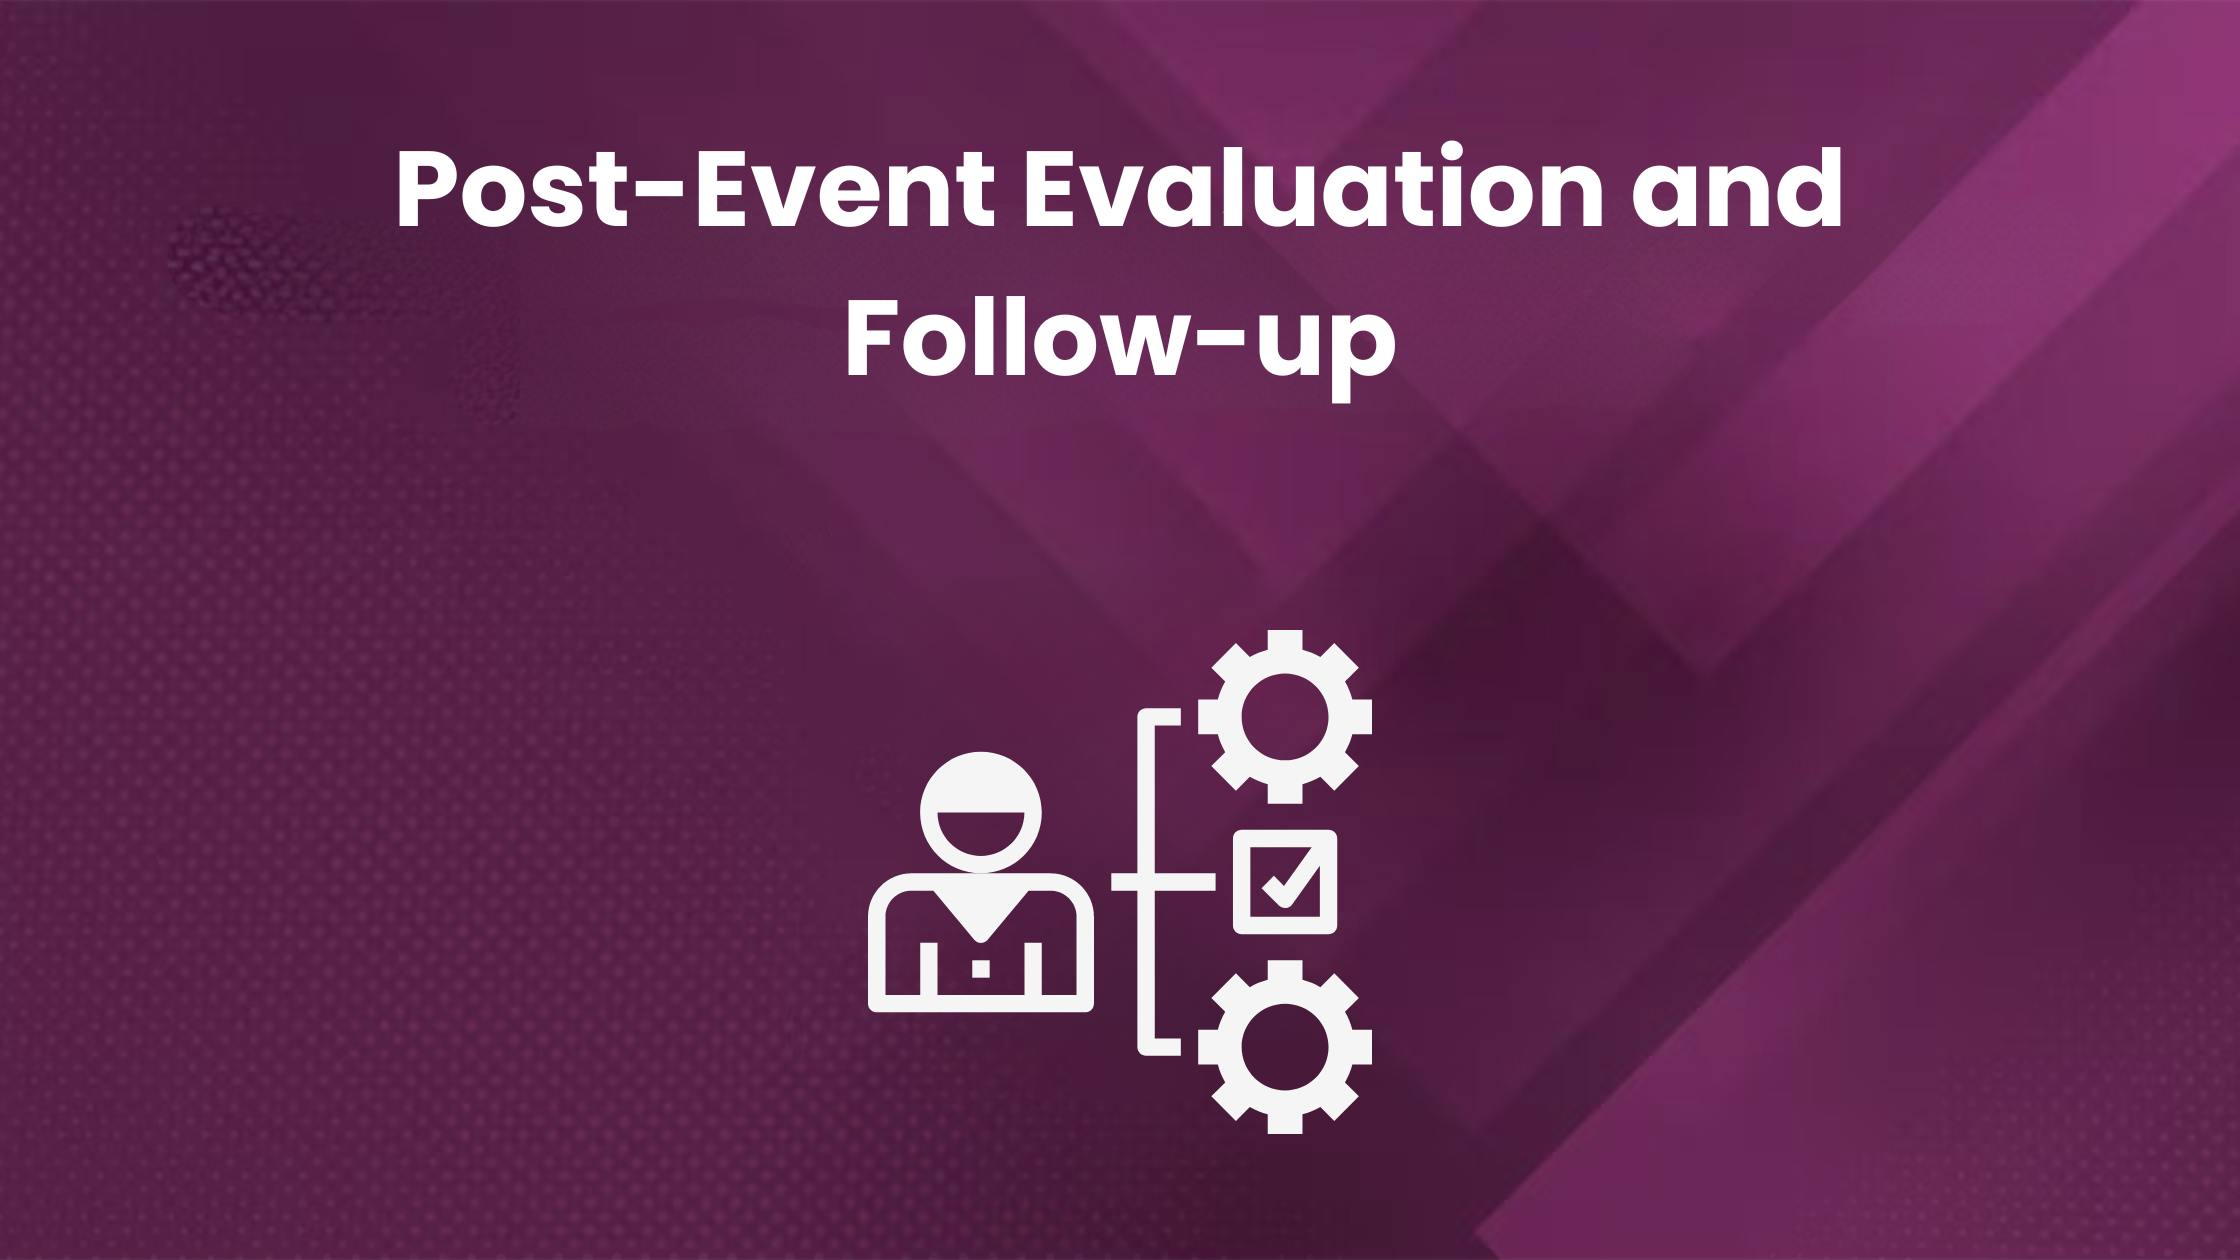 Post-event evaluation and follow-up